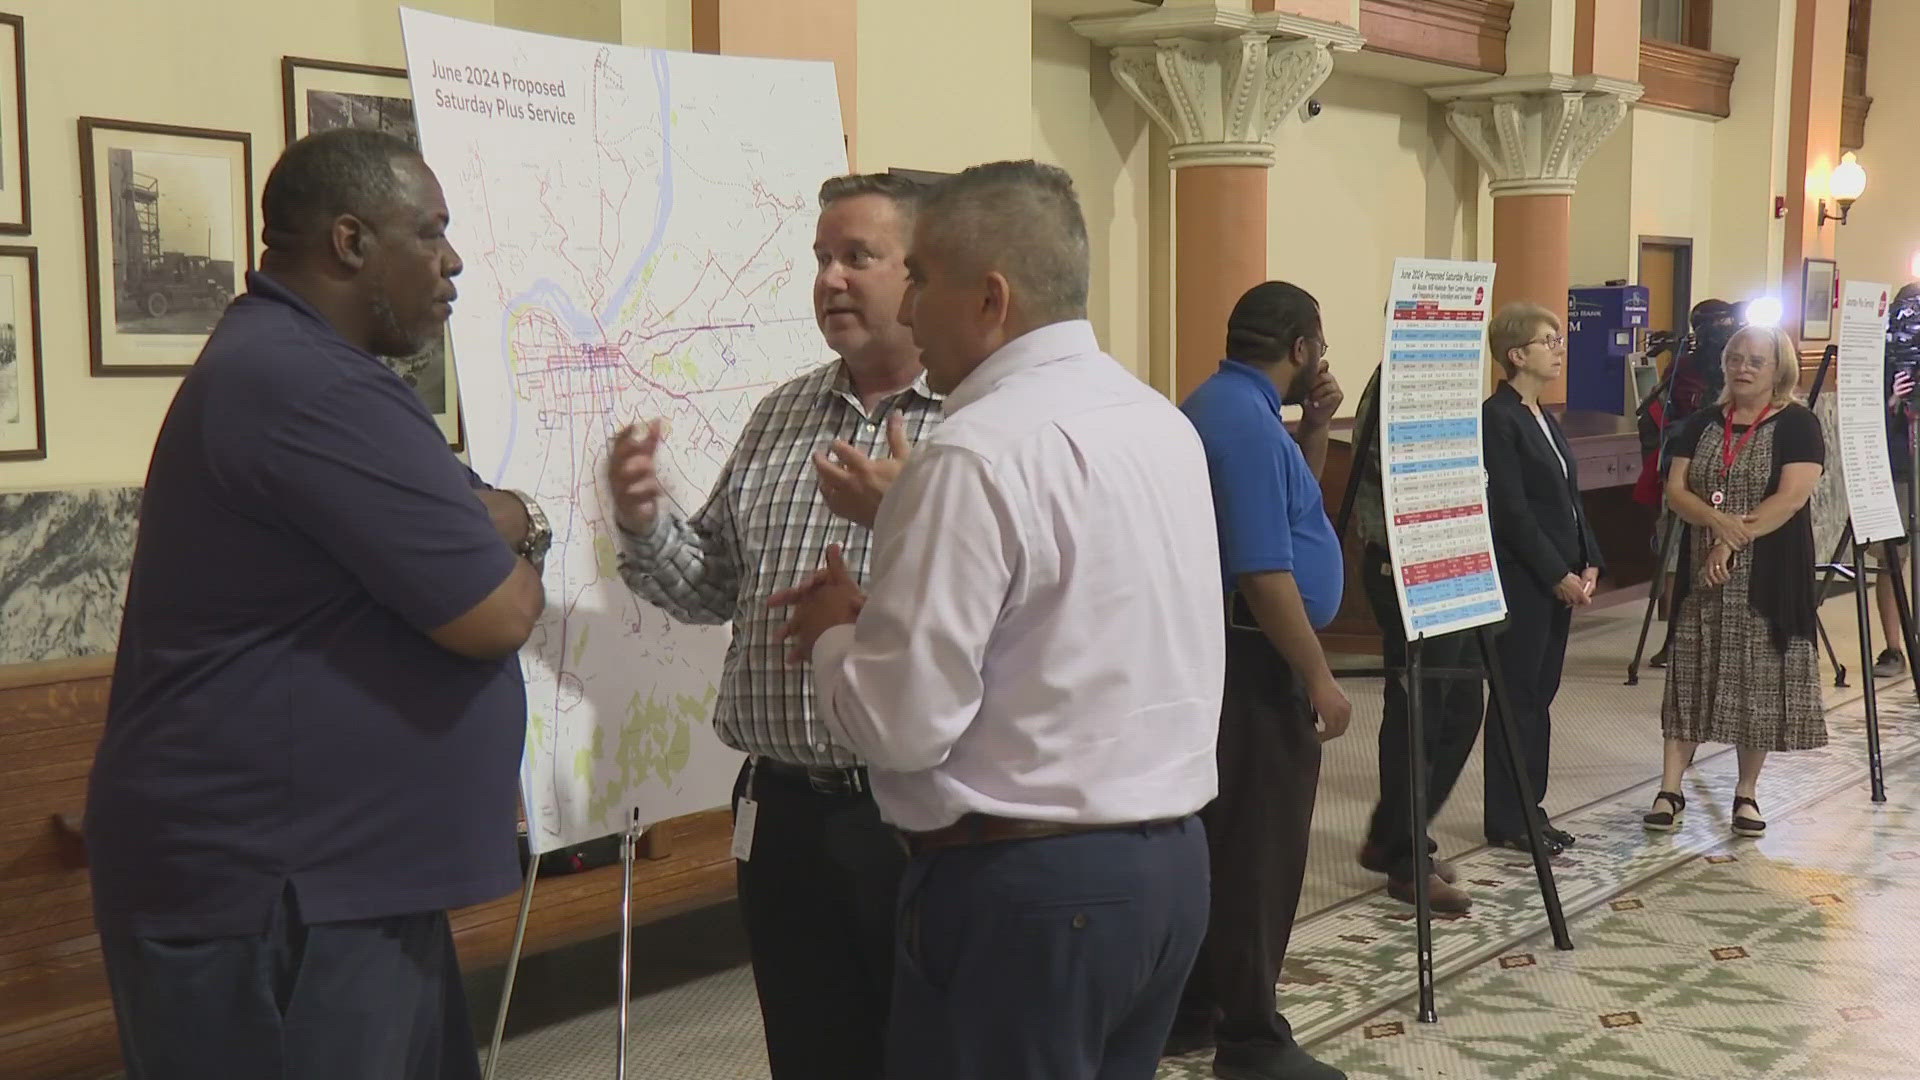 TARC hosted an open house for riders to ask questions about the changes.